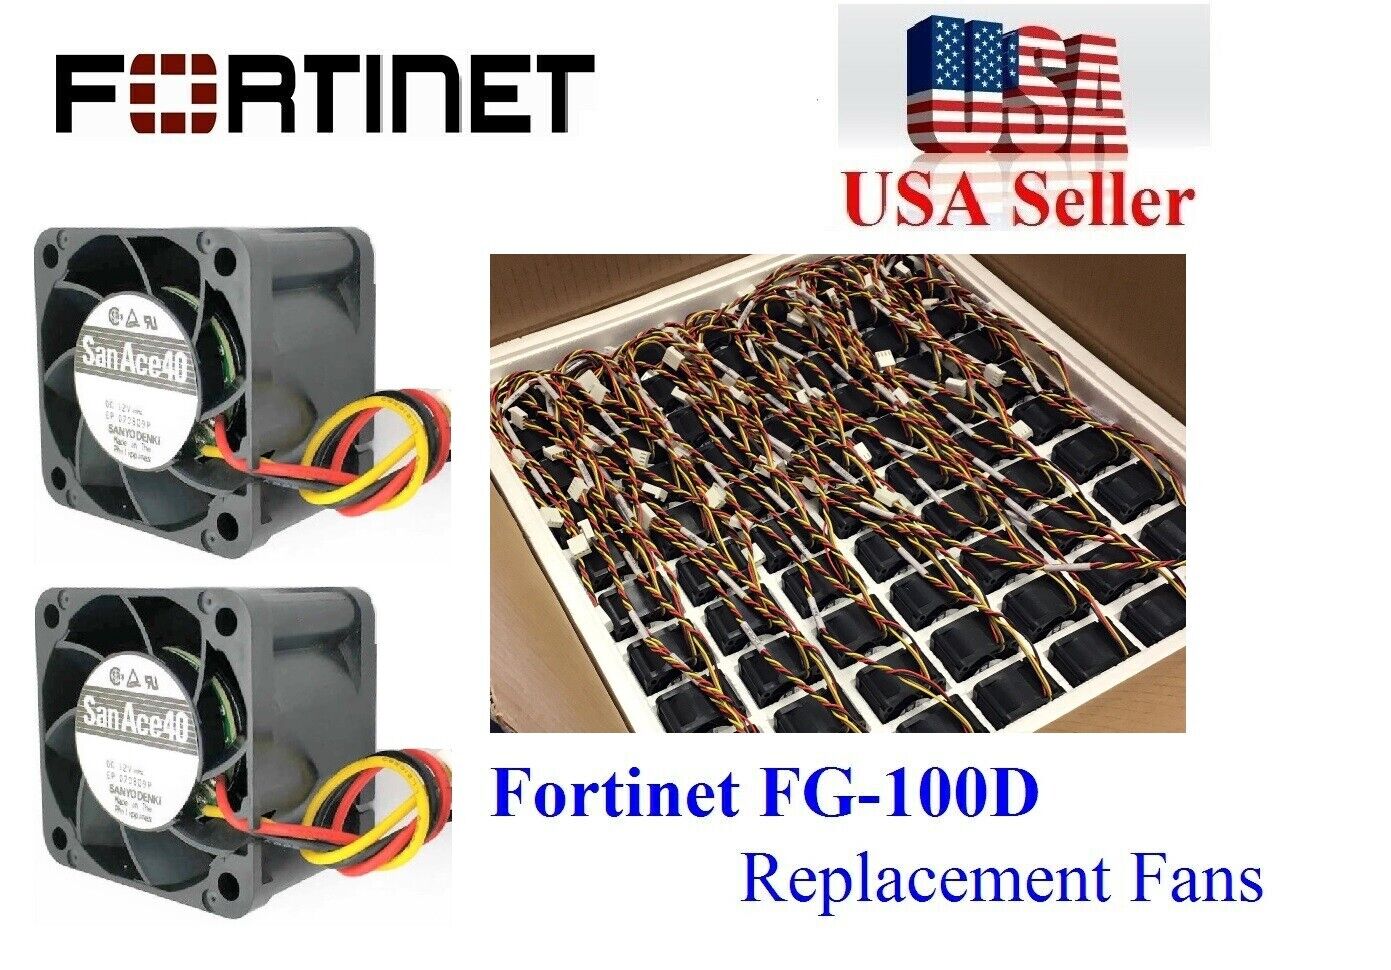 Lot 2x replacement 4 wire Fans for Fortinet FG-100D FortiGate-100D Firewall Fans